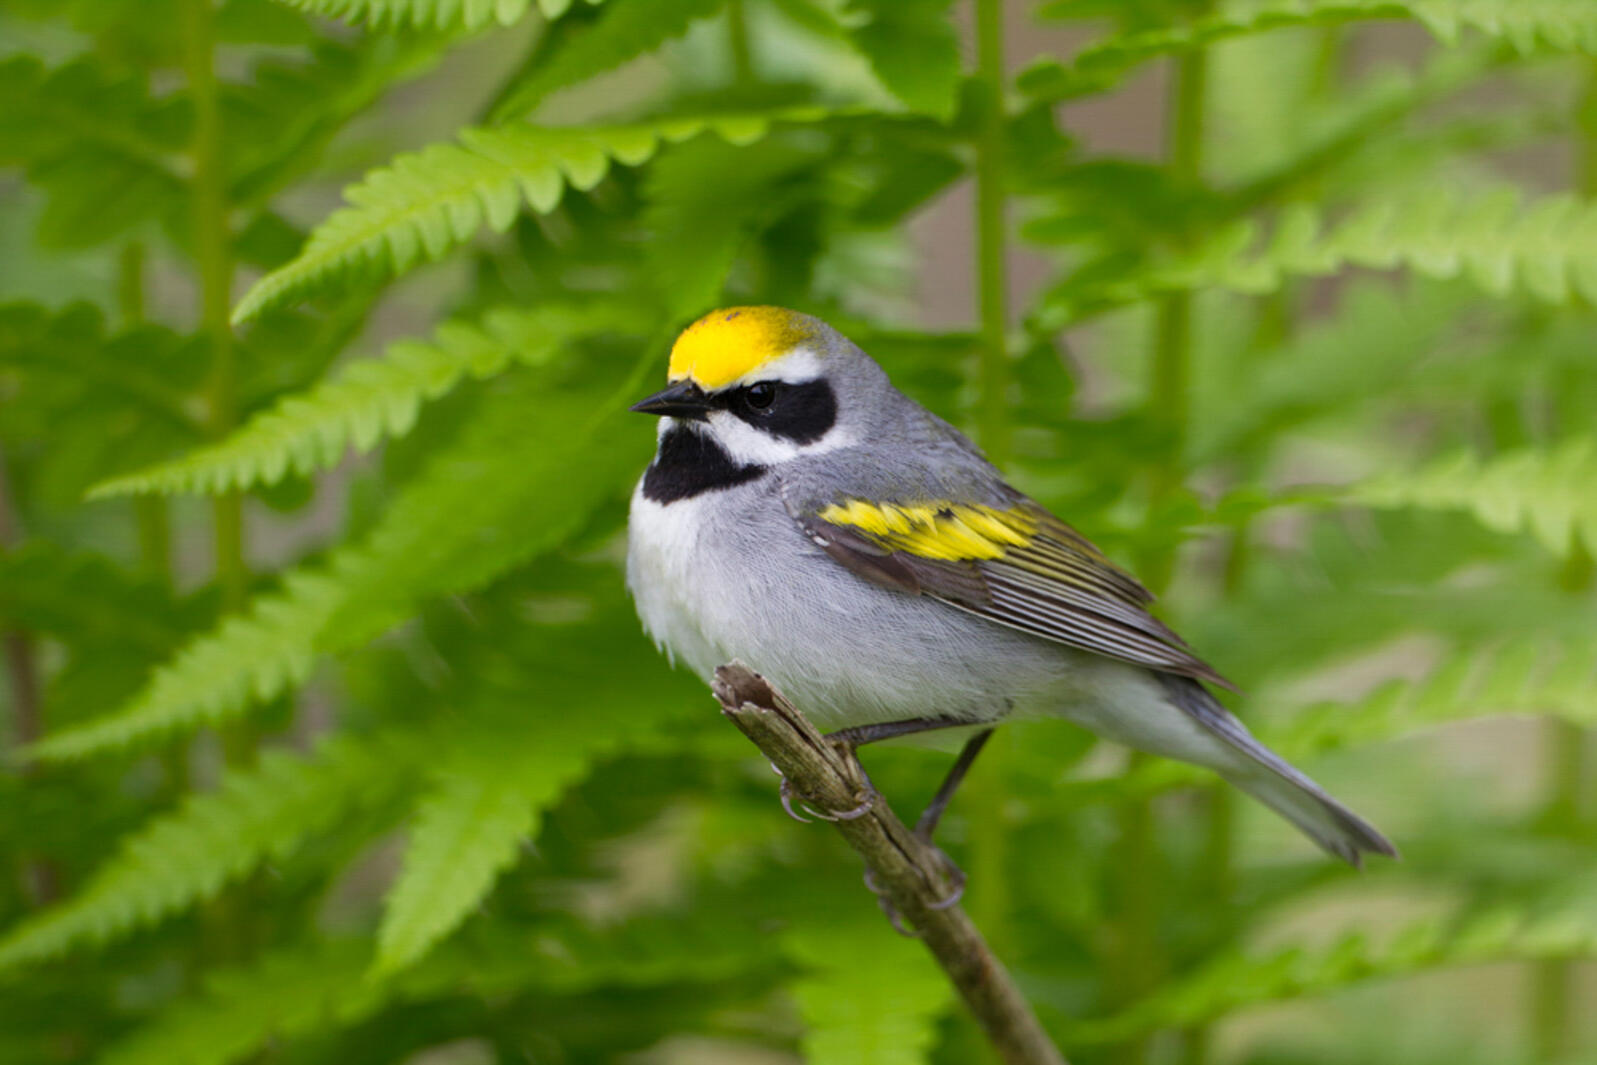 Male Golden-winged Warbler perched on dead branch with a soft background of green ferns.